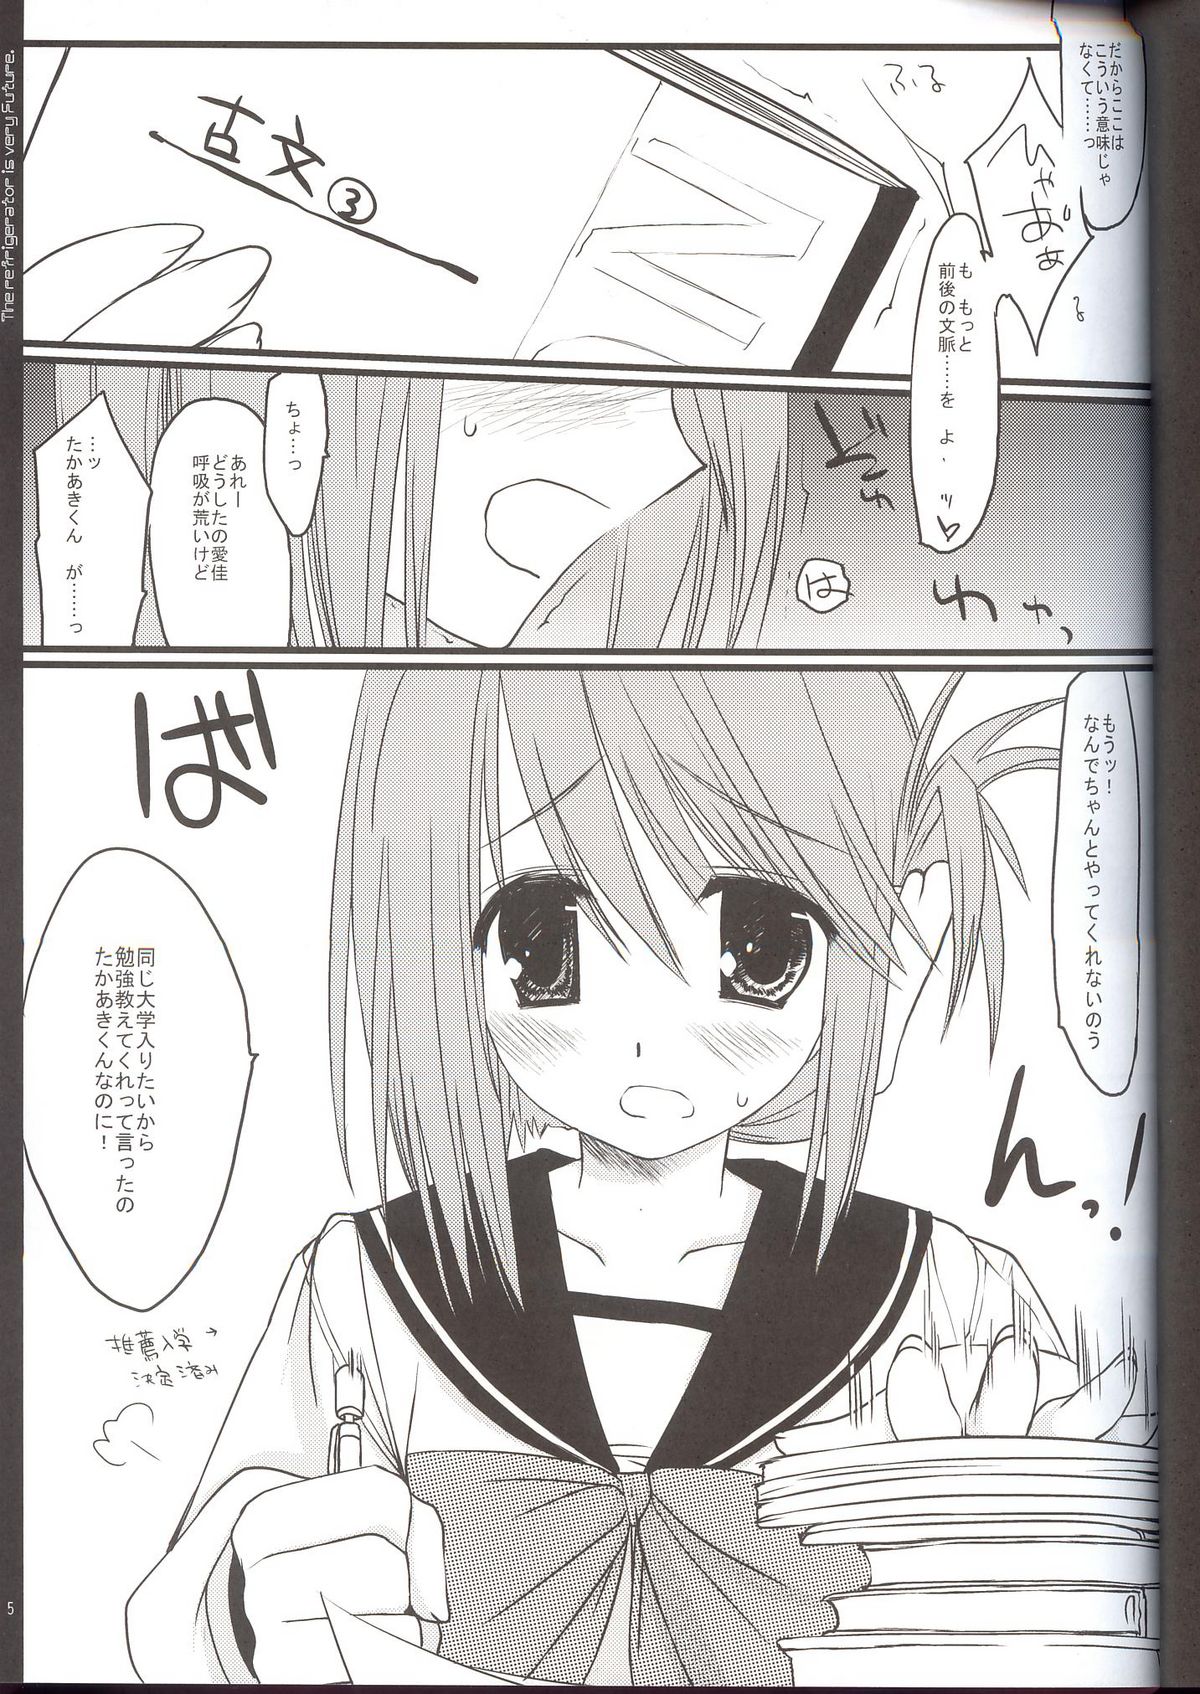 (C69) [D.N.A.Lab. (Miyasu Risa)] Reizoukotte Tottemo Future ‐ The Refrigerator is very Future (ToHeart 2) page 4 full